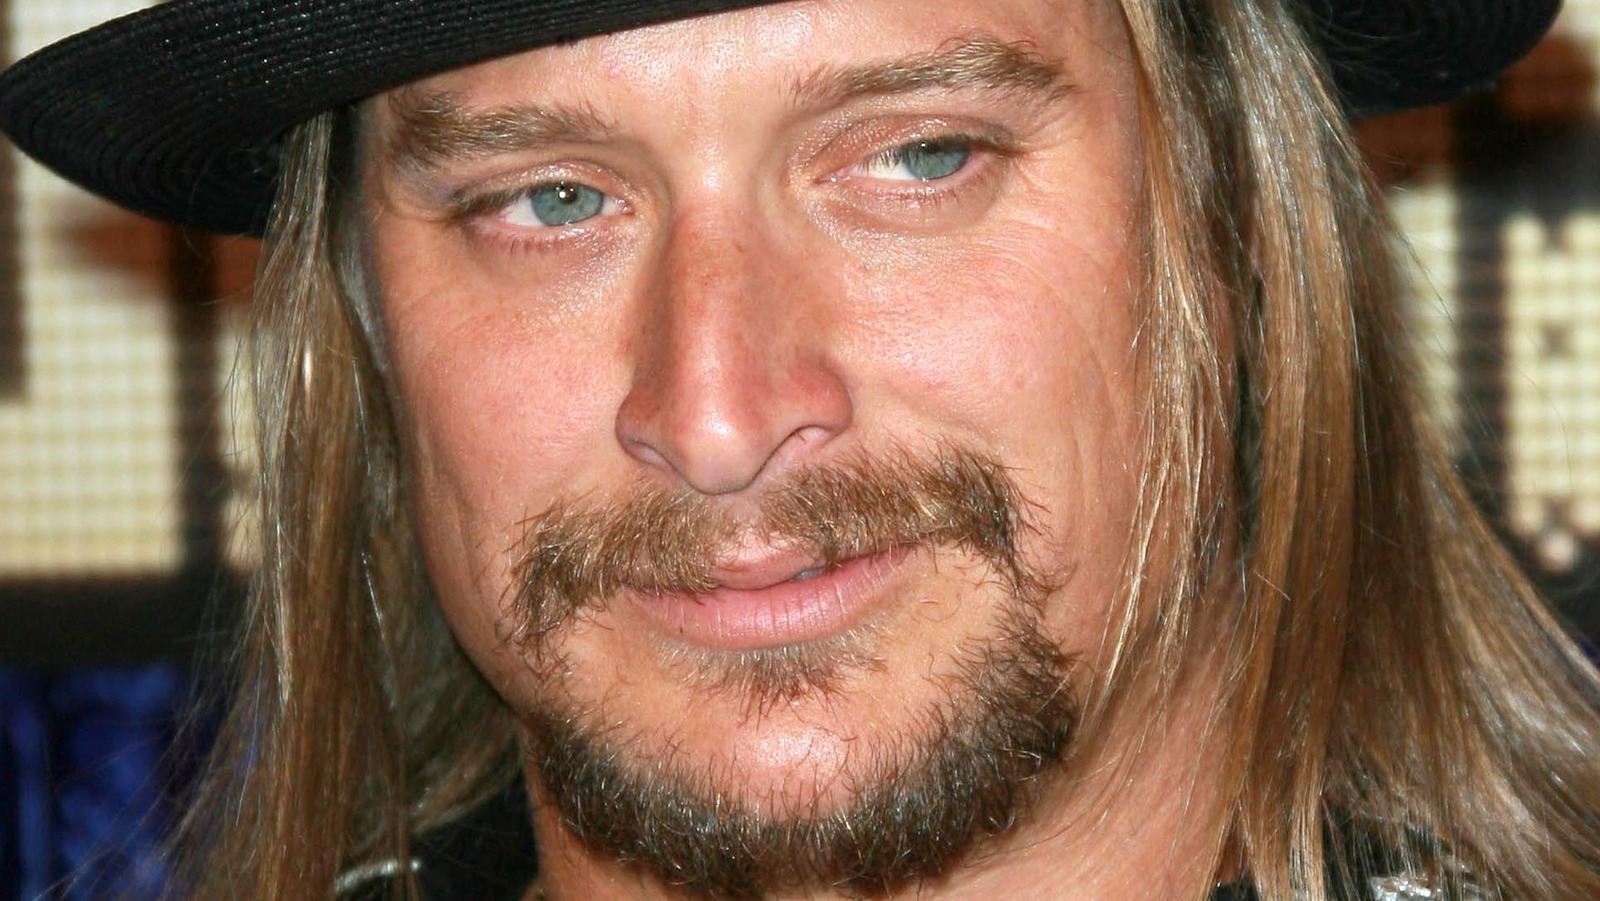 Kid Rock really dated this Real Housewives of Orange County Star?